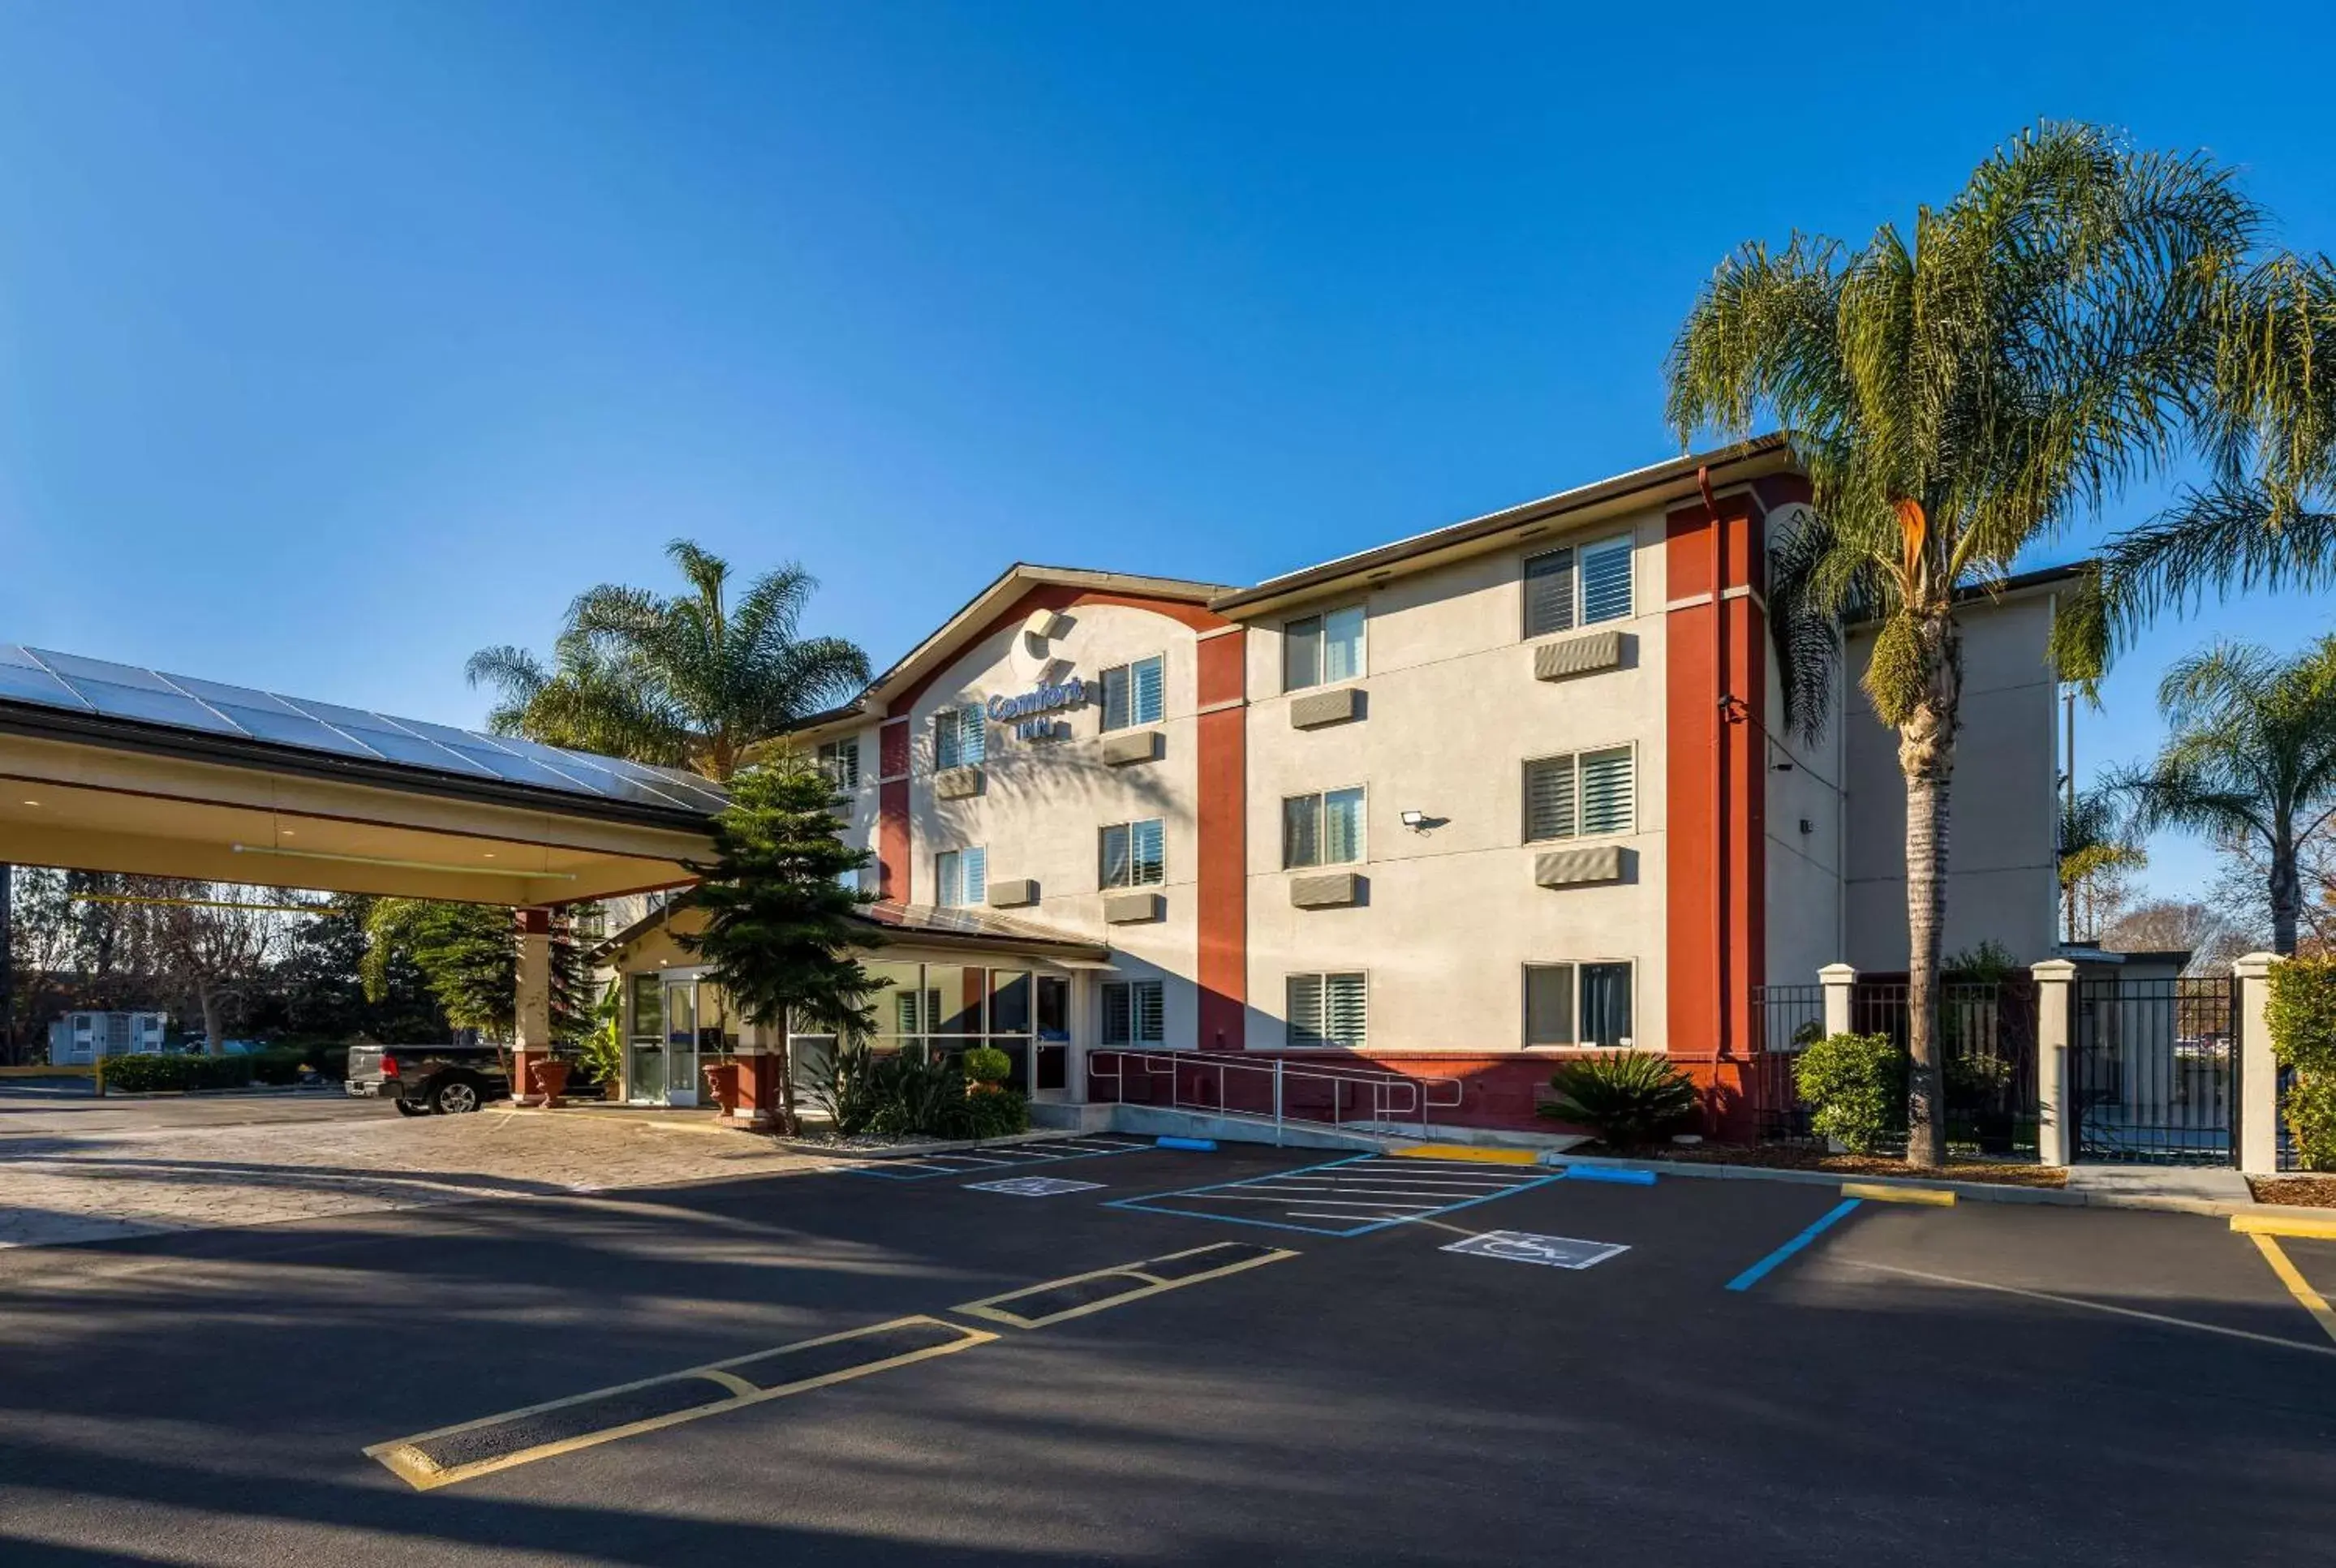 Property Building in Comfort Inn Gilroy